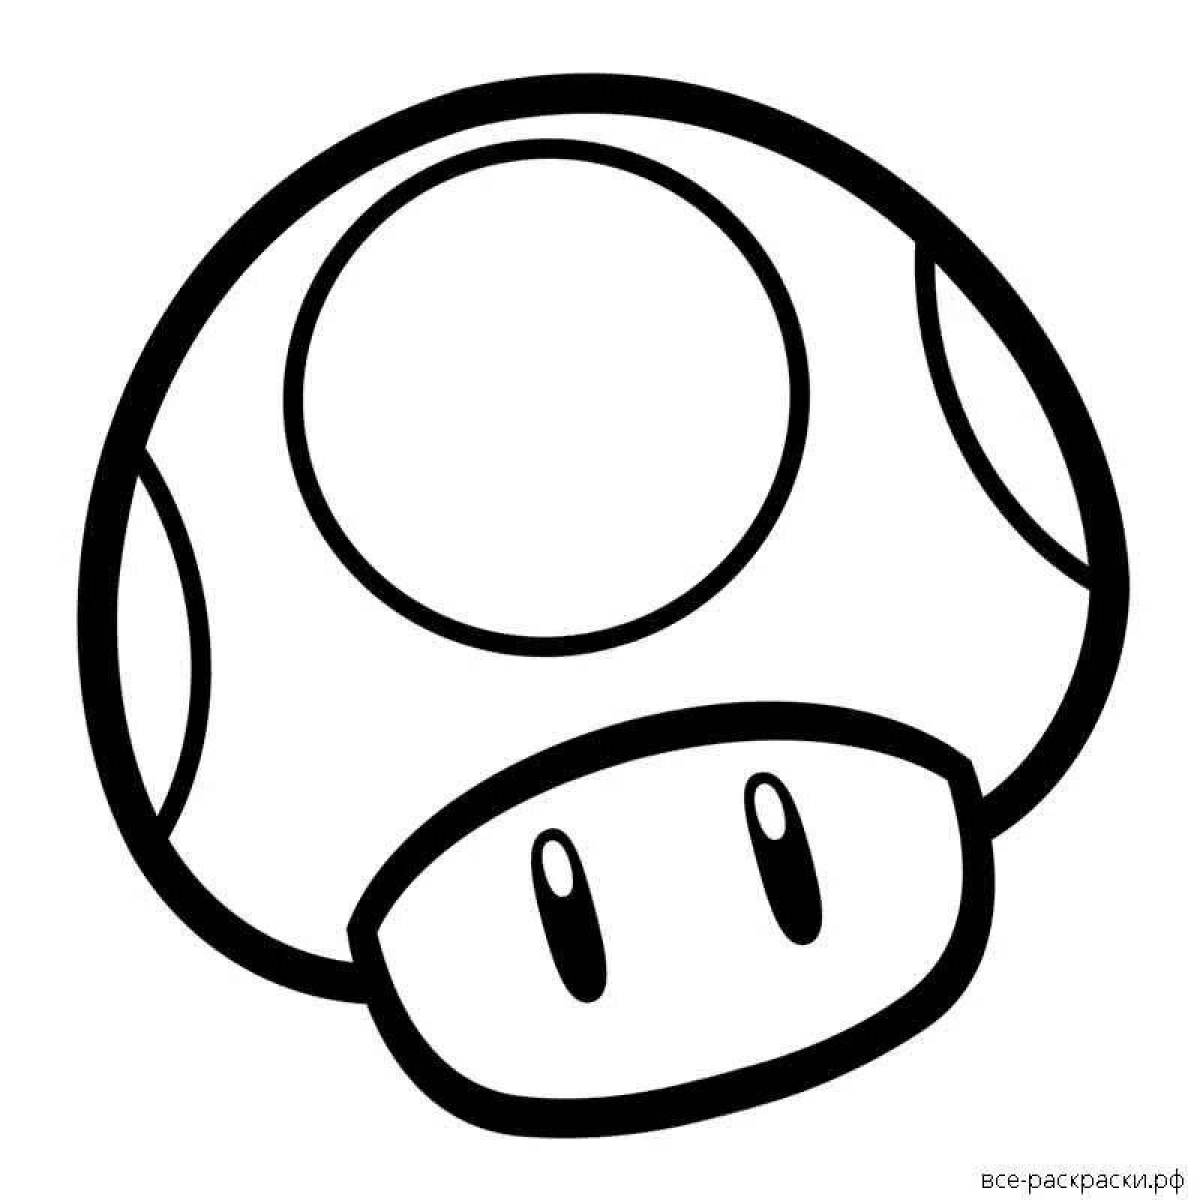 Lego mario coloring page playful